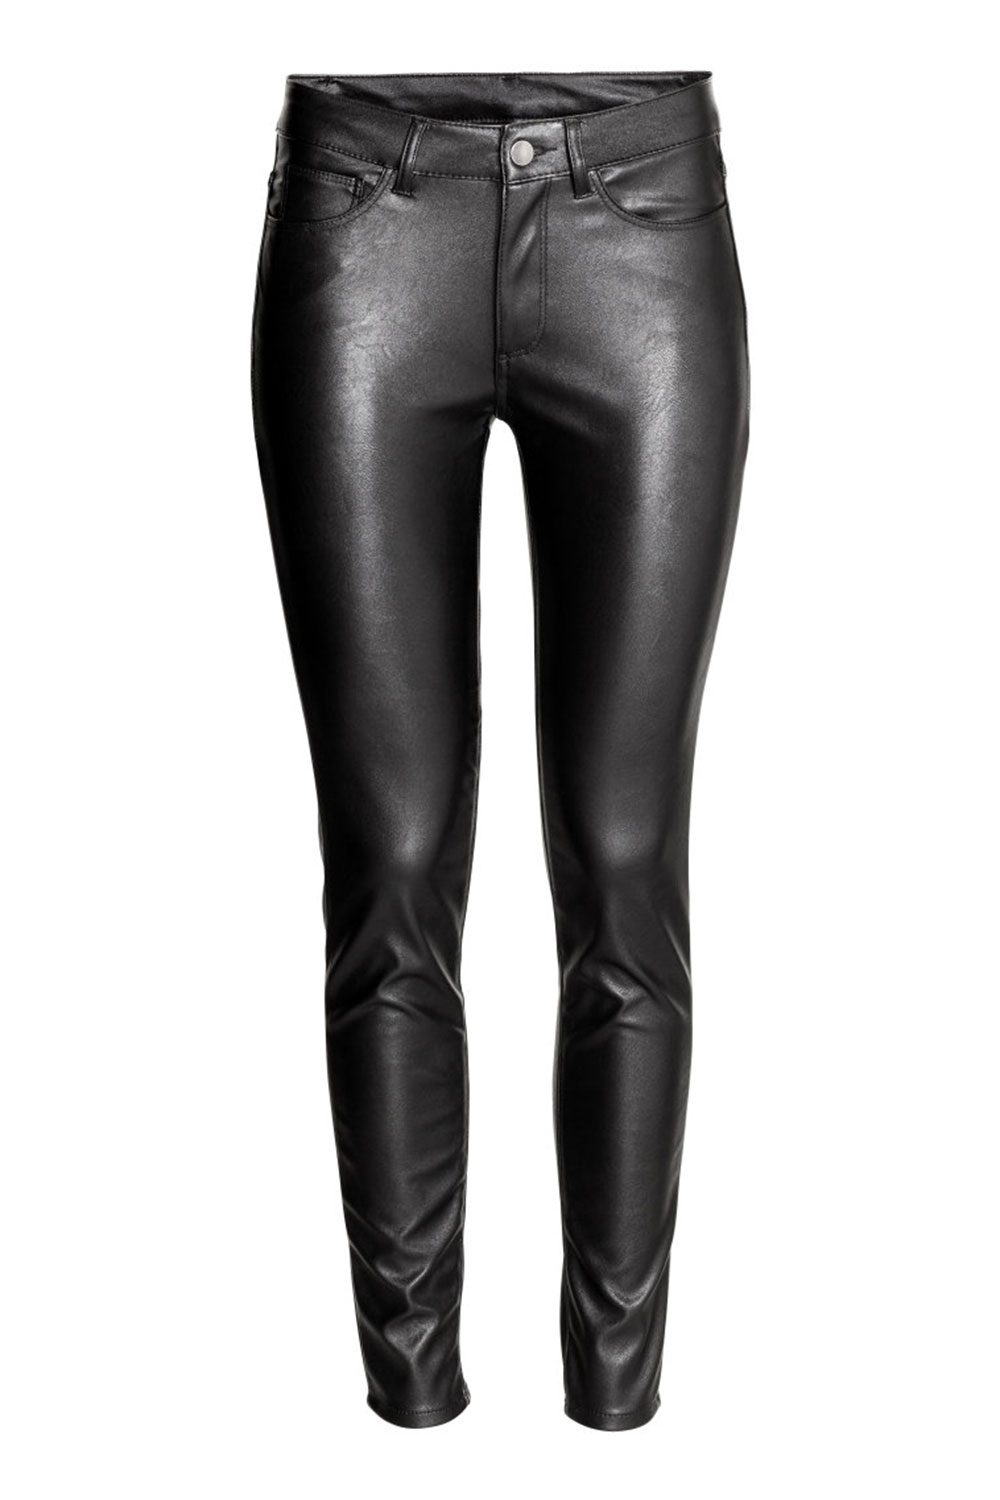 H&M leather look pants